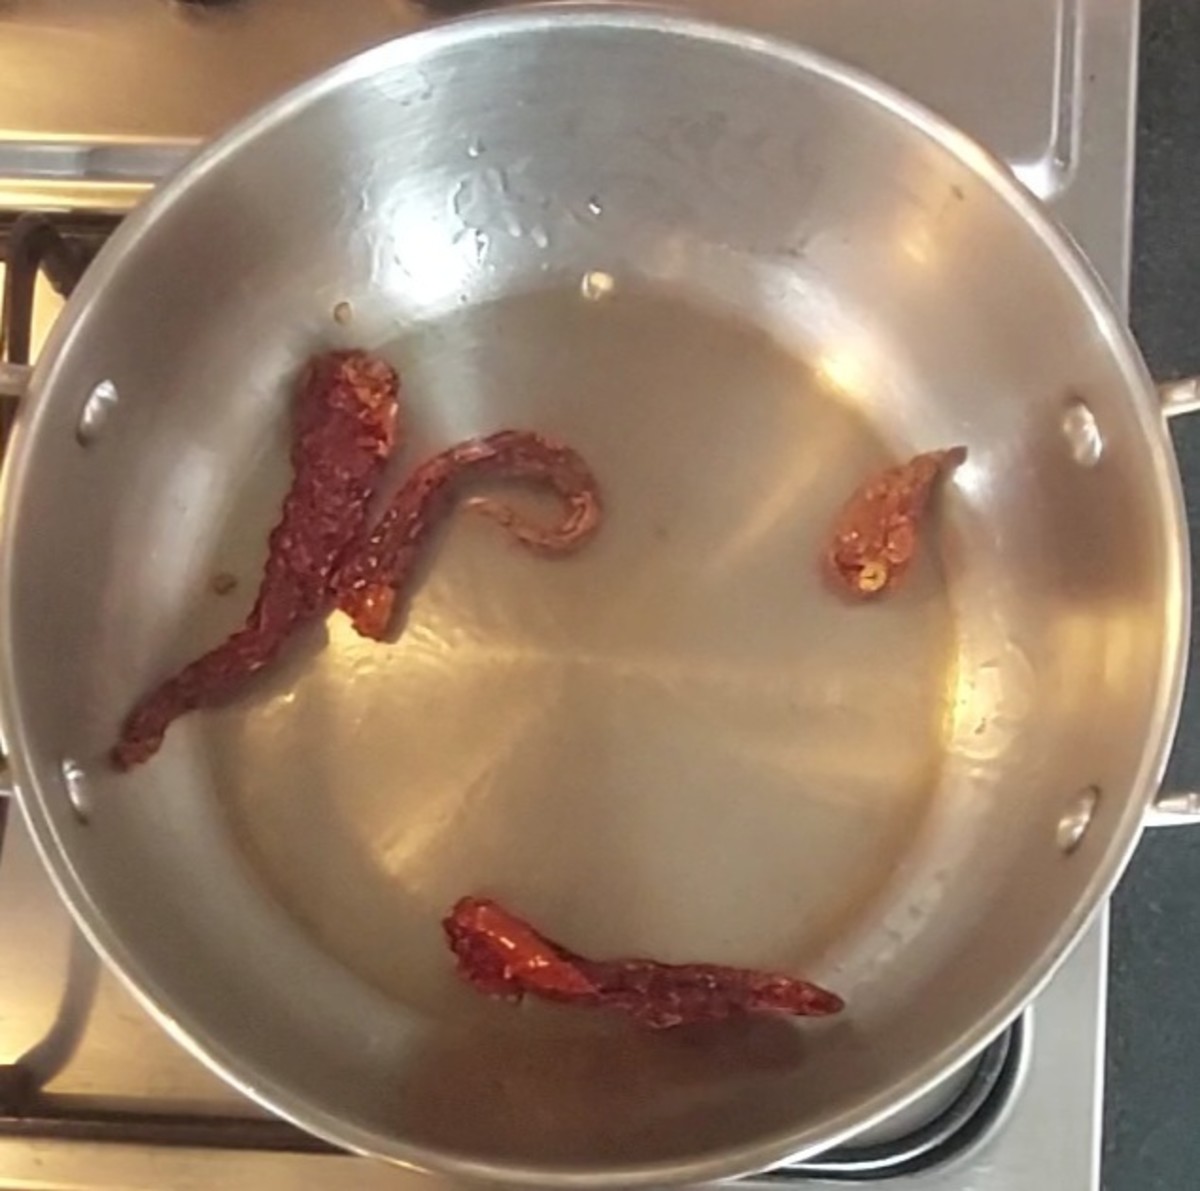 In the same pan, heat 1/2 teaspoon oil, add 2-3 red chilies, fry for a few seconds and transfer to the bowl.